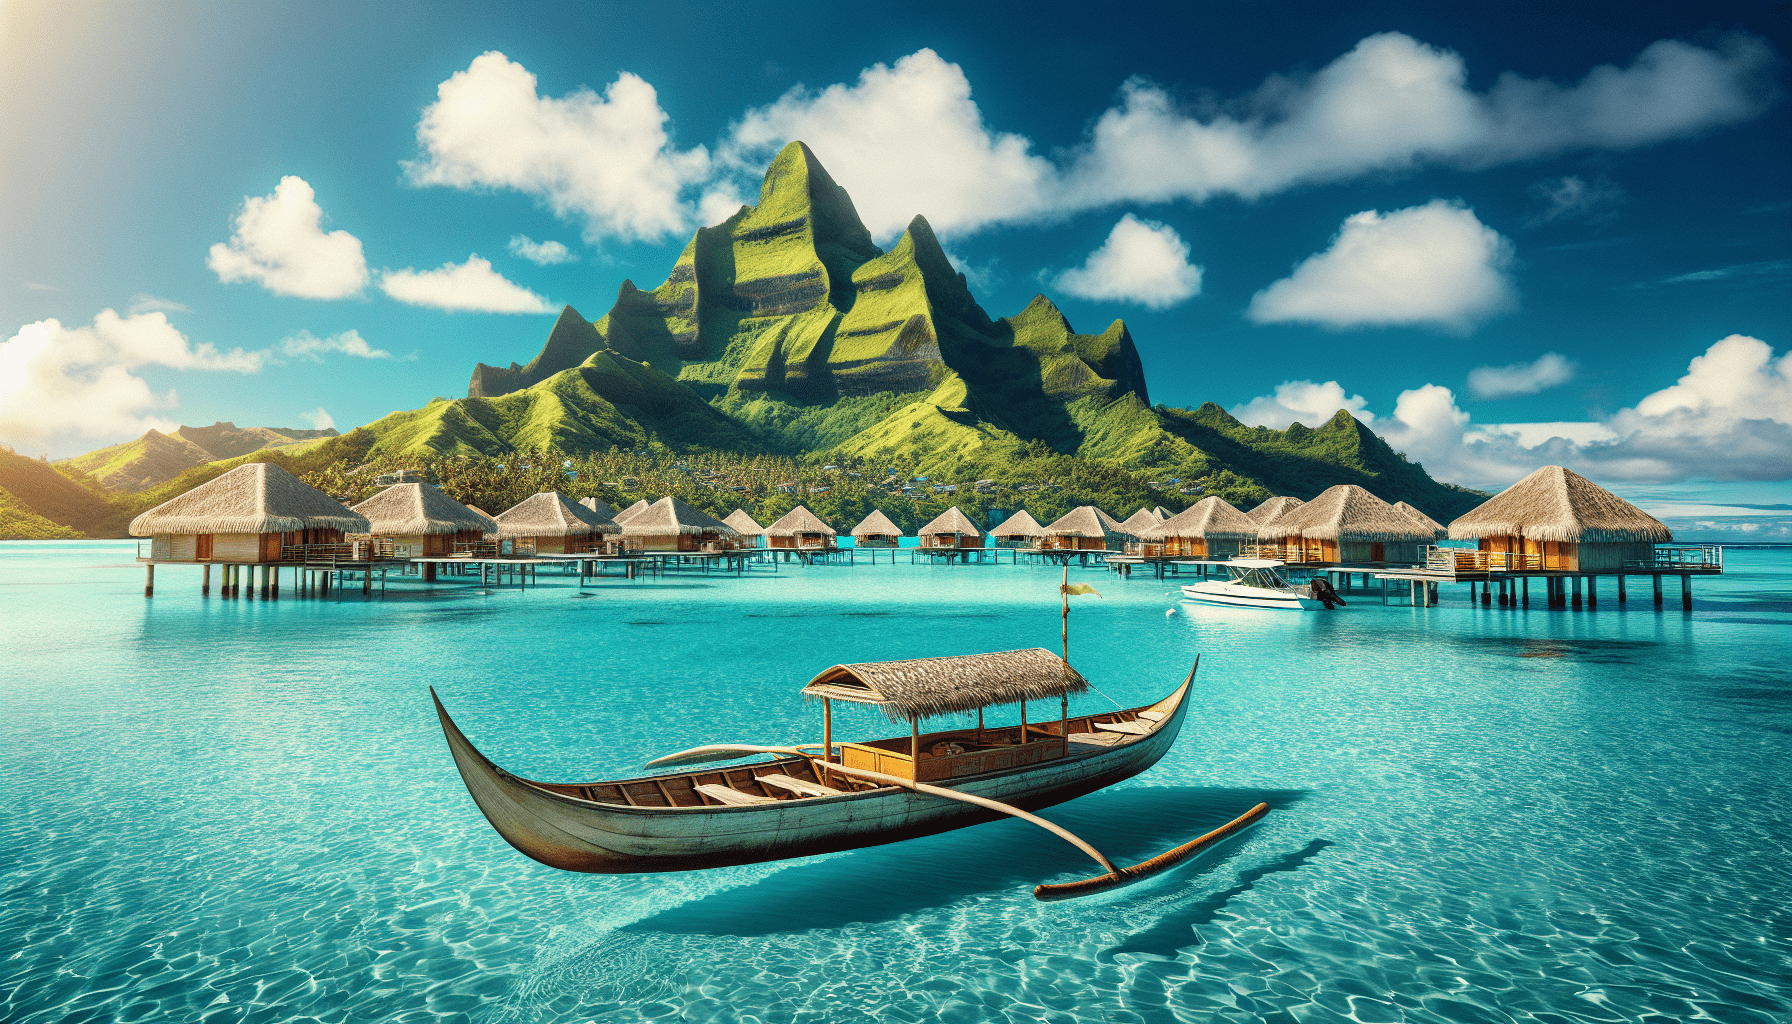 How Do I Get From One Resort To Another In Bora Bora?